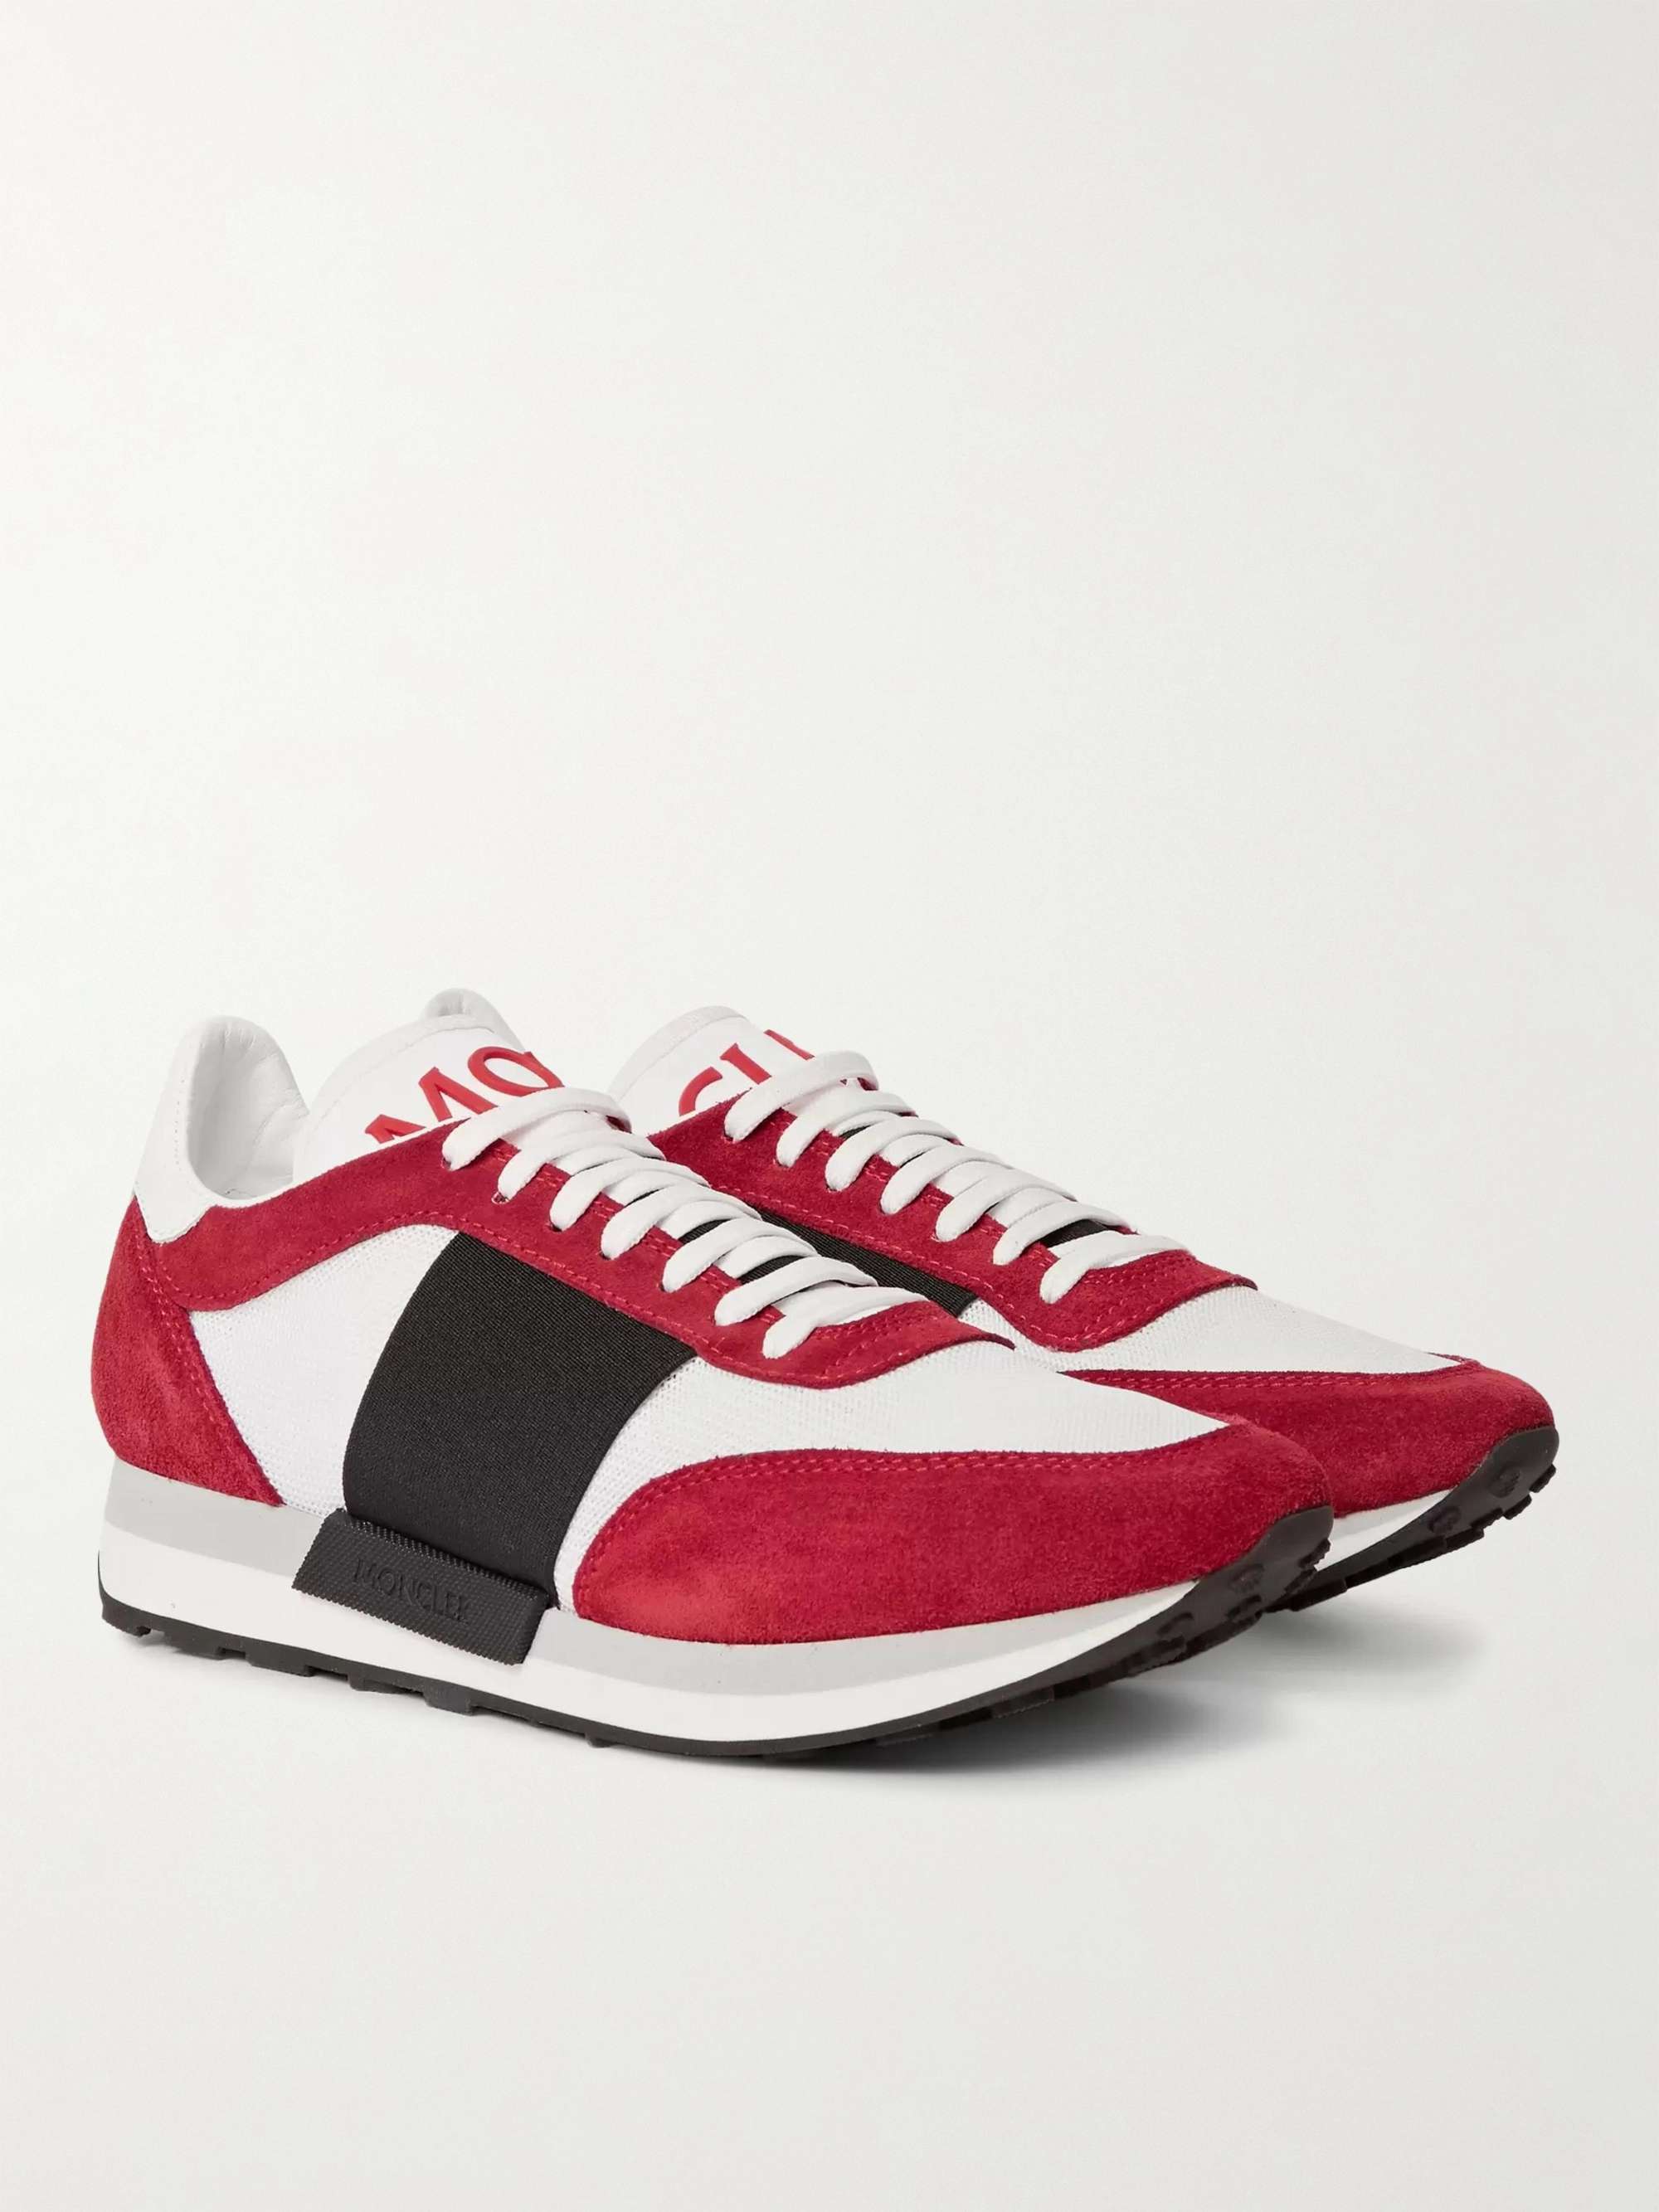 MONCLER Horace Suede And Mesh Sneakers